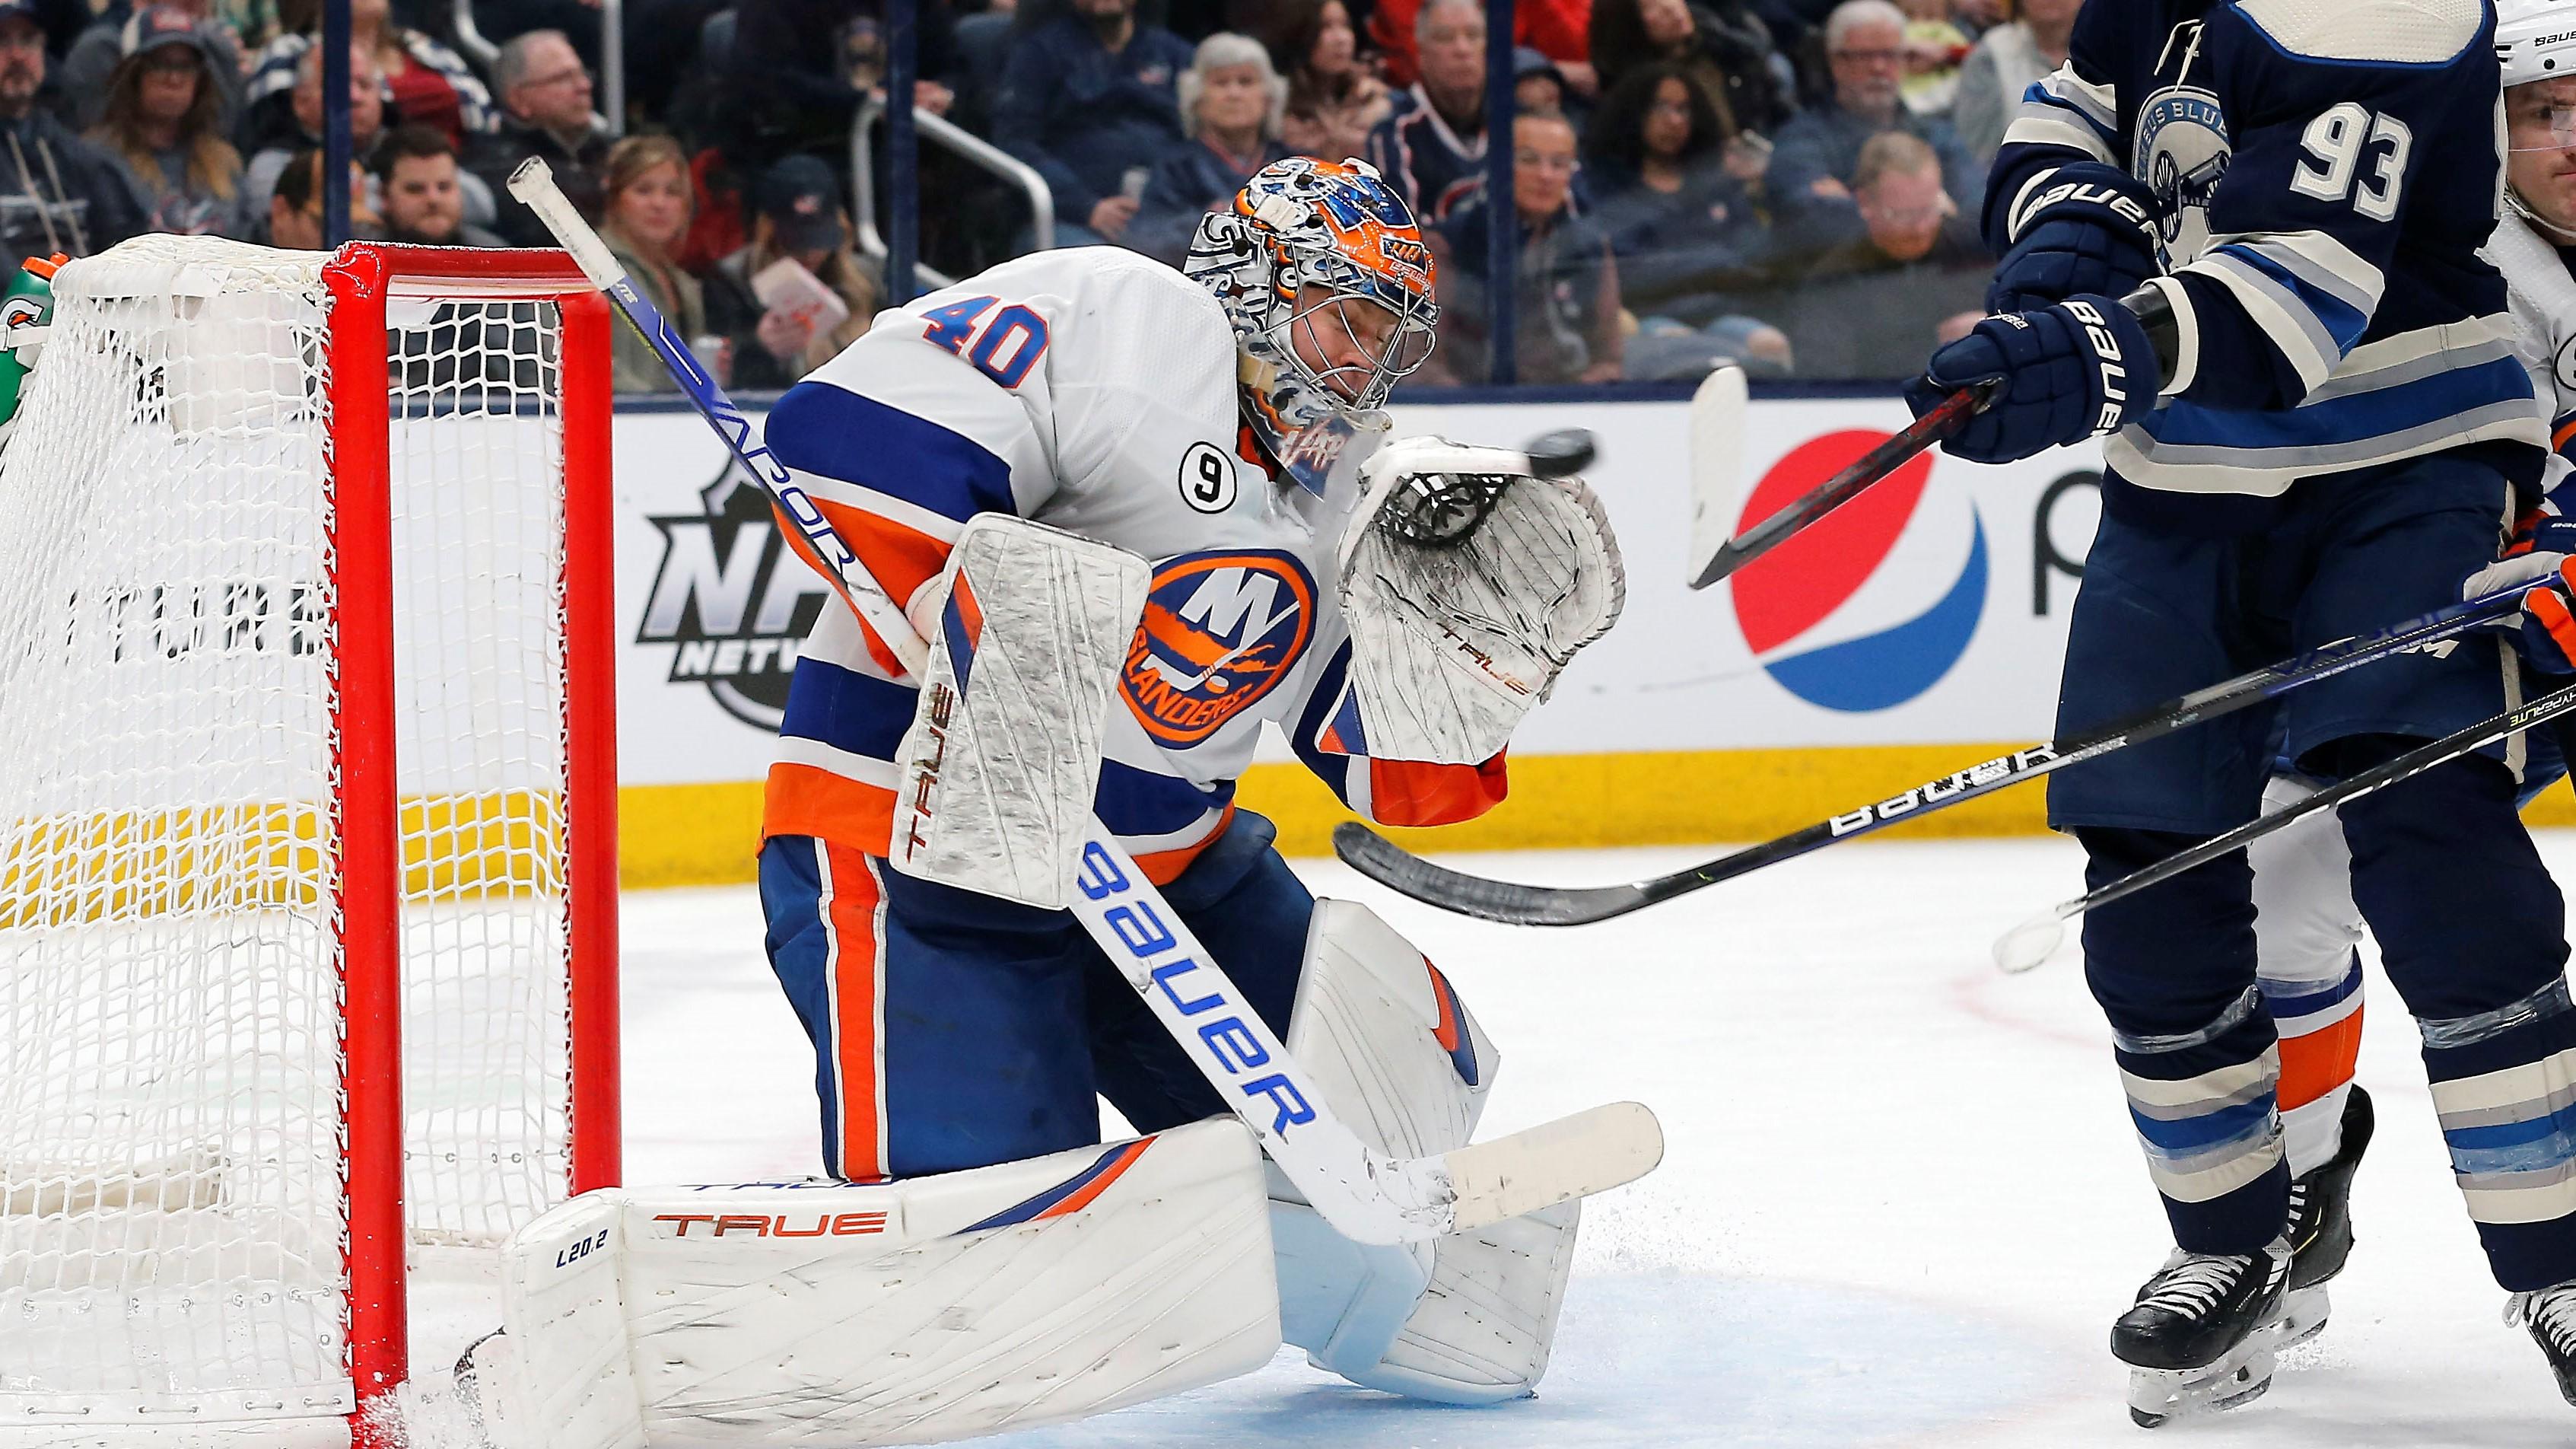 Mar 29, 2022; Columbus, Ohio, USA; New York Islanders goalie Semyon Varlamov (40) makes a save as Columbus Blue Jackets right wing Jakub Voracek (93) reaches for the puckduring the second period at Nationwide Arena. Mandatory Credit: Russell LaBounty-USA TODAY Sports / Russell LaBounty-USA TODAY Sports